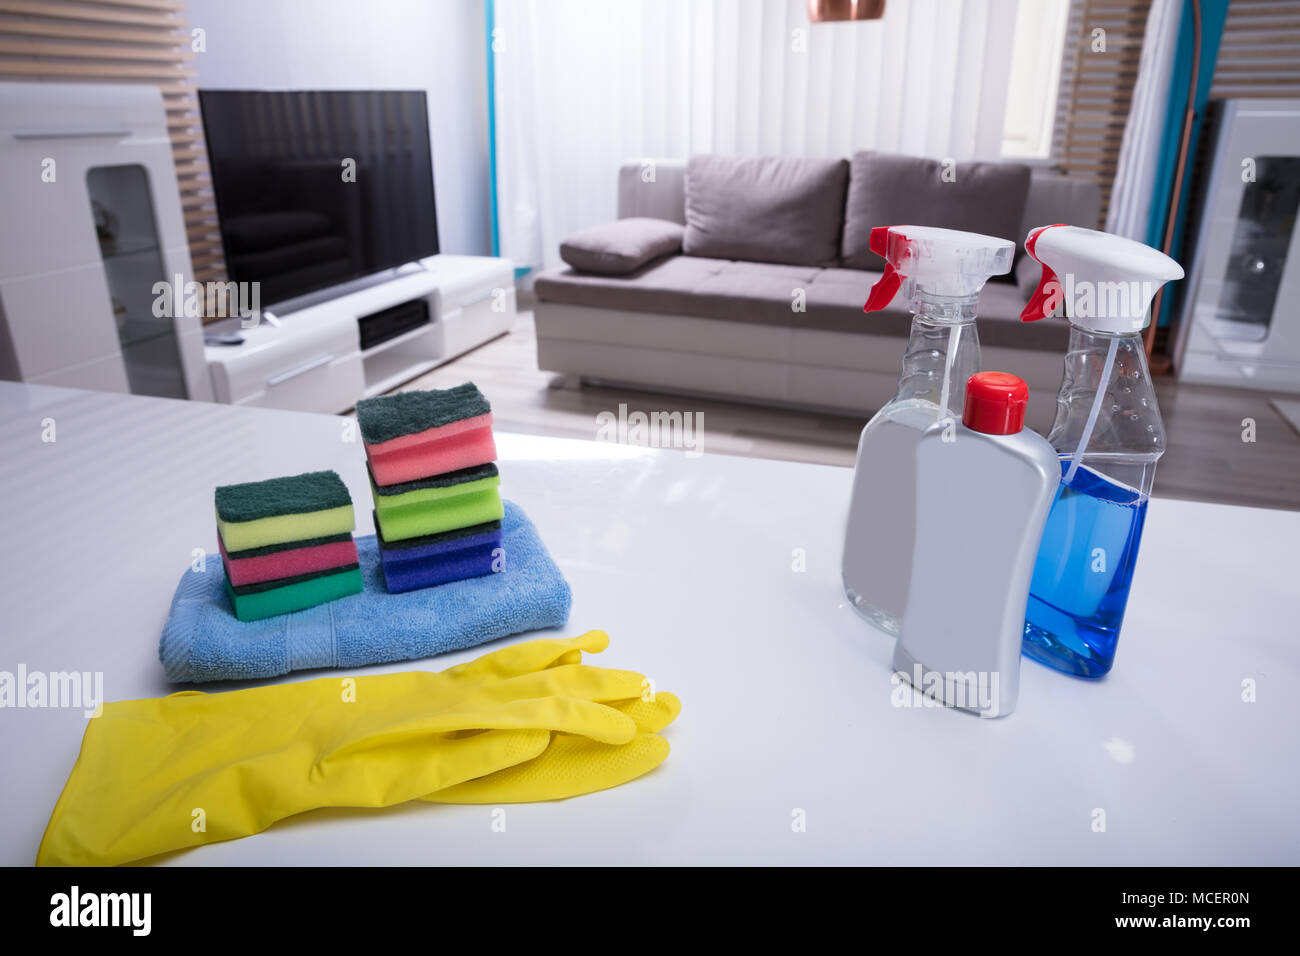 Different Cleaning Spray Bottles With Sponge And Gloves On White Desk Stock Photo